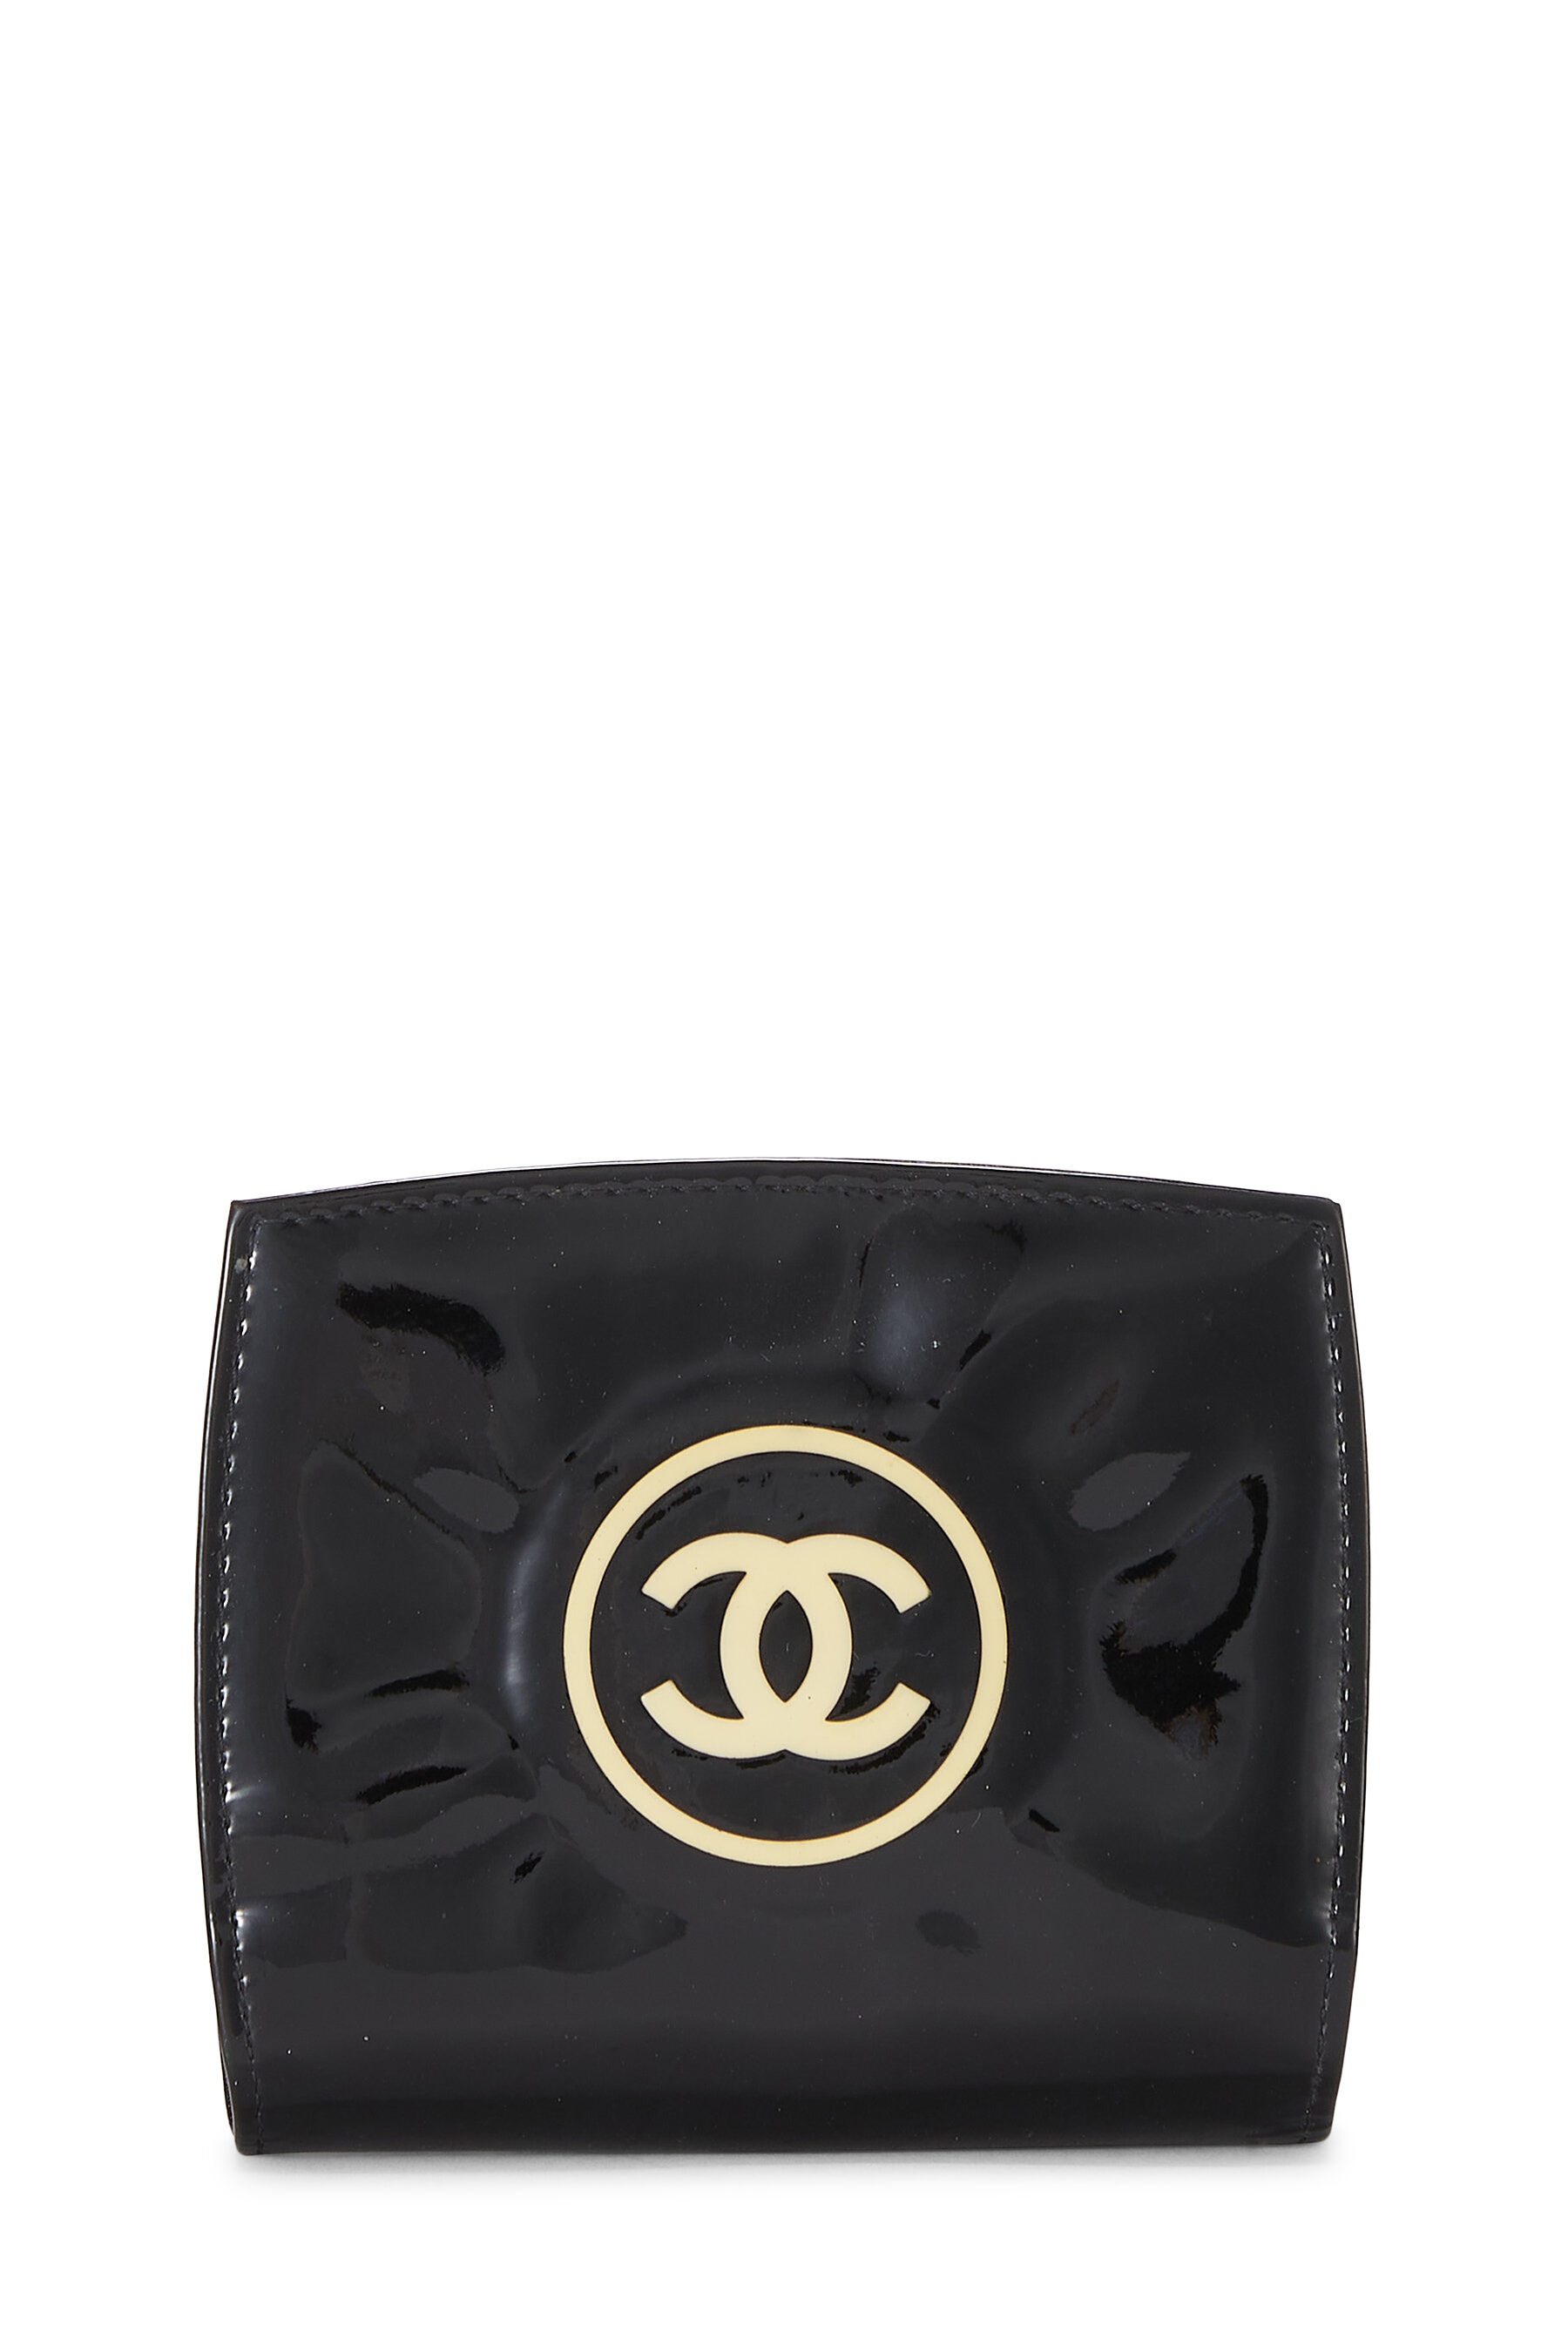 Chanel - Black Patent Leather Compact Wallet